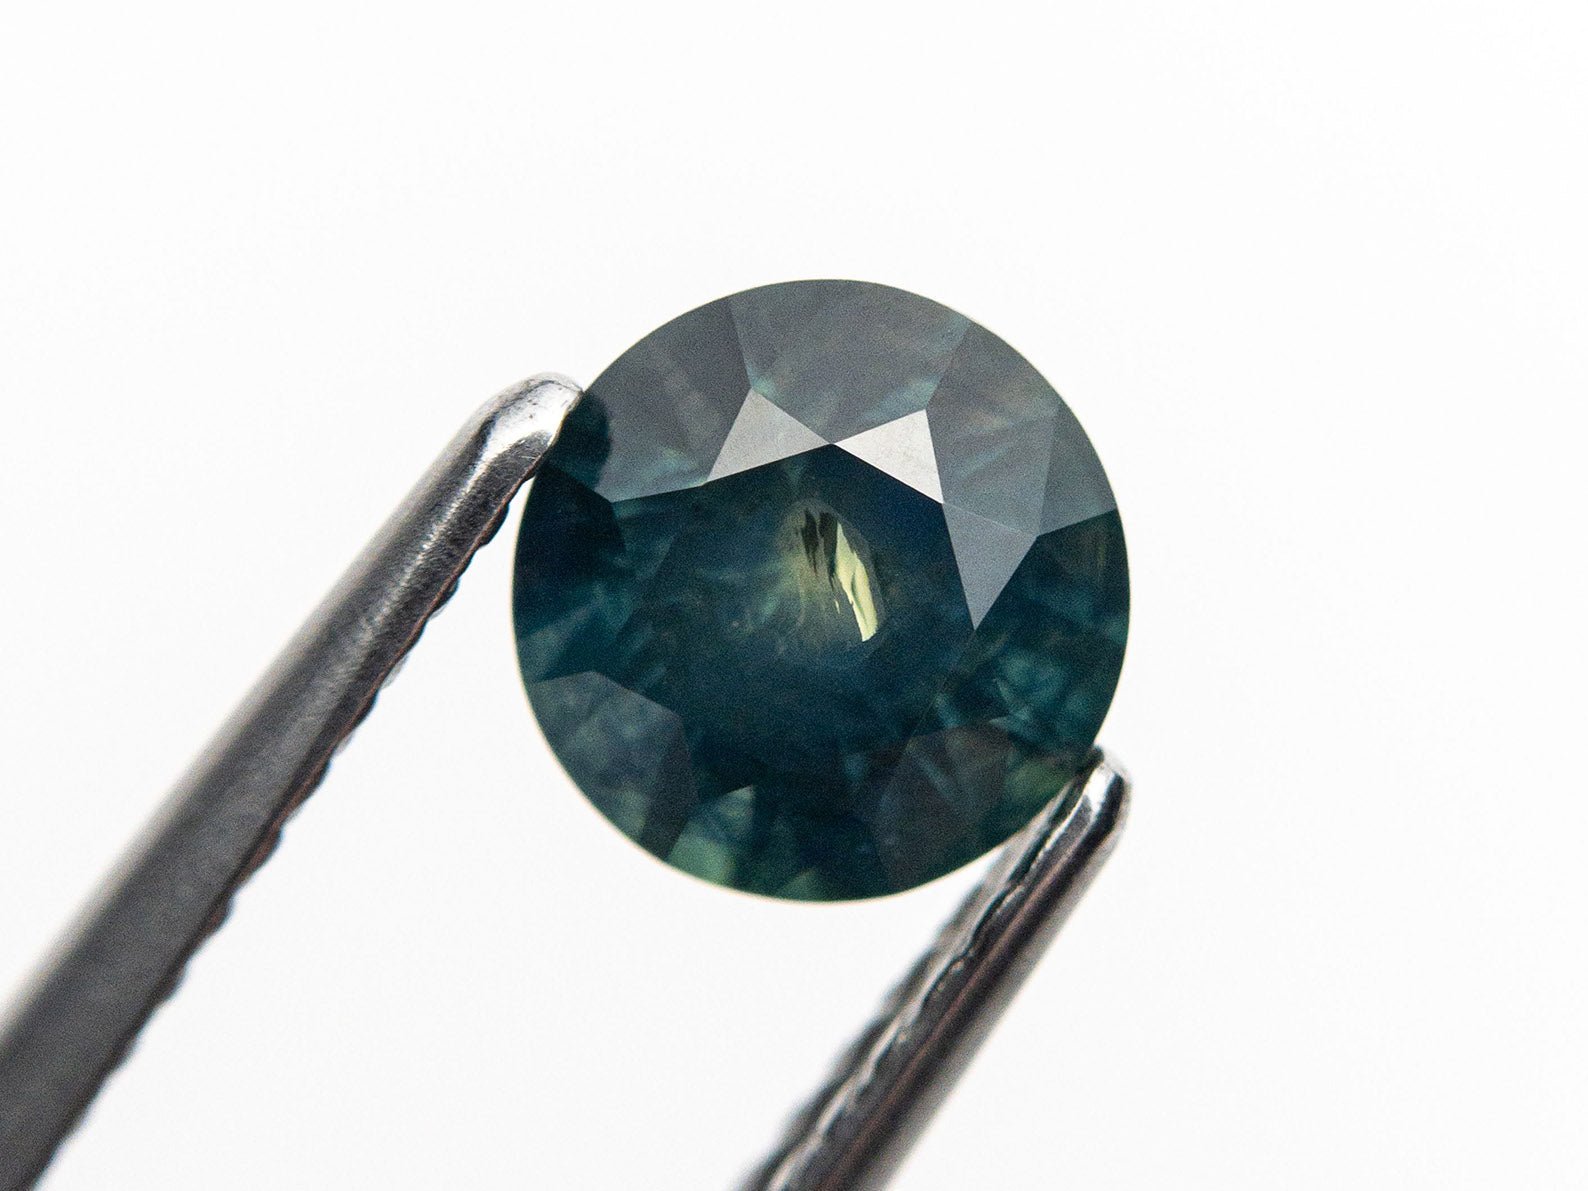 Round Brilliant Cut 1.07ct Teal Montana Sapphire - Lelya - bespoke engagement and wedding rings made in Scotland, UK